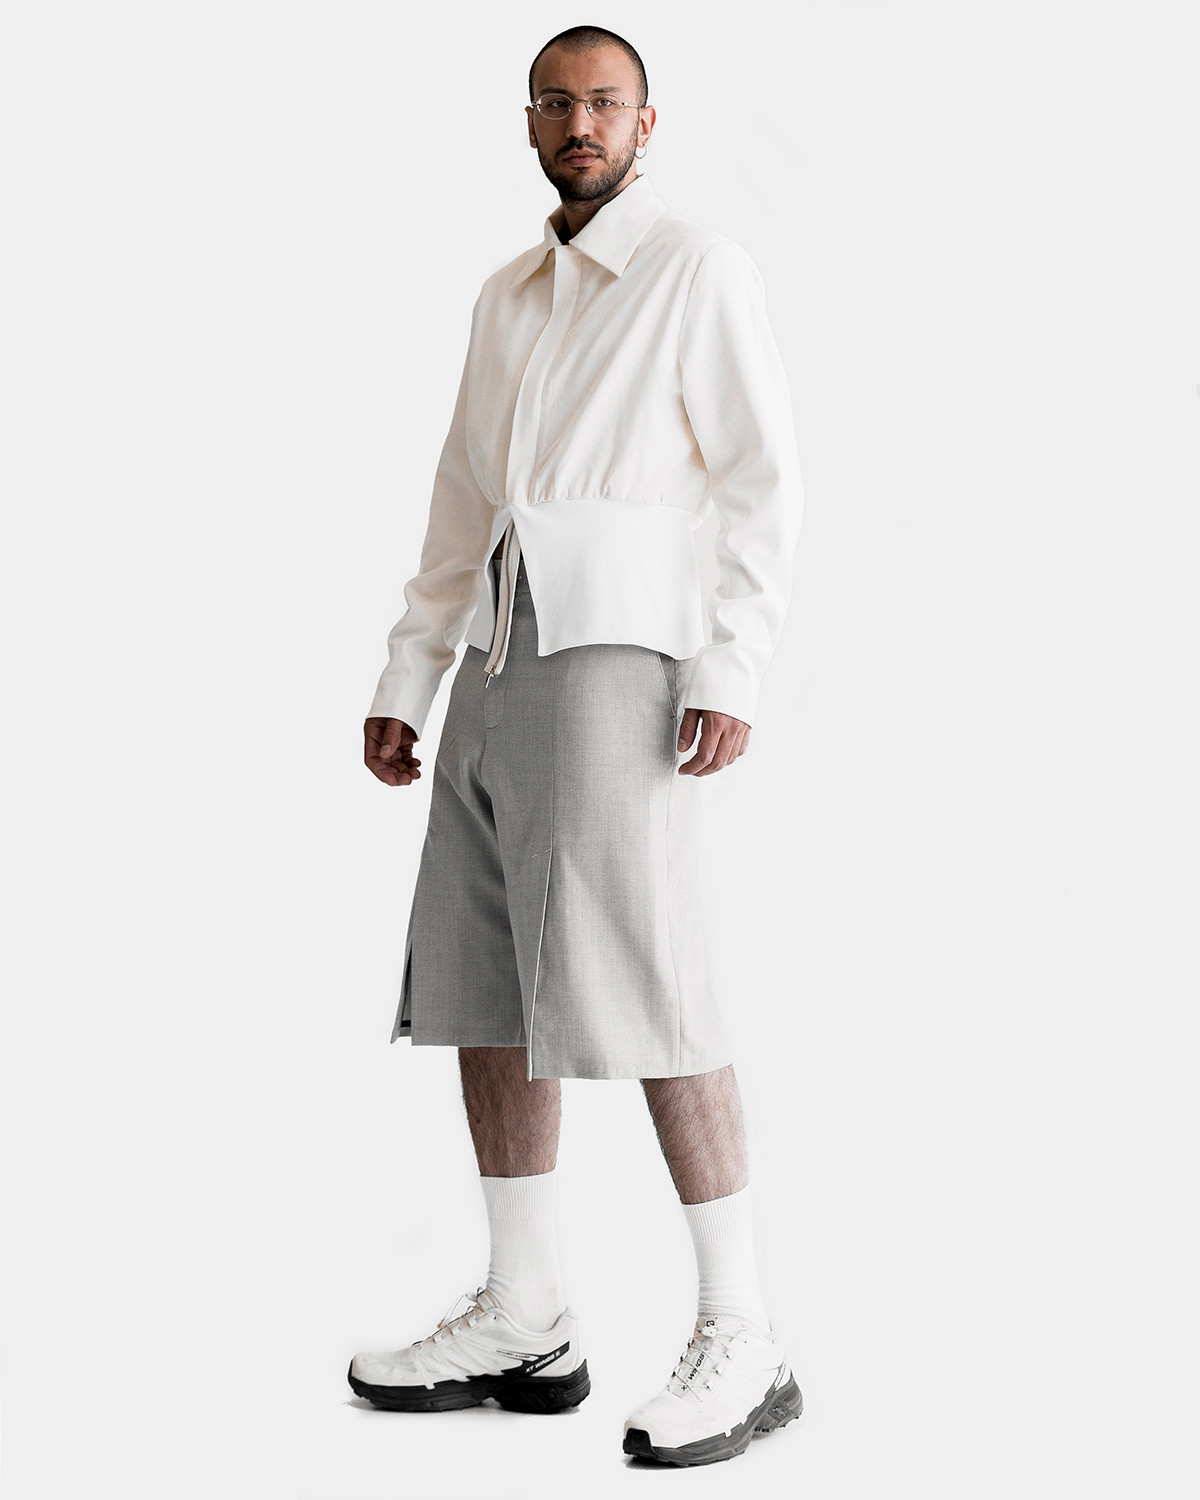 Vagan is wearing a milk white zipped GUIDE jacket and woolen slashed FRIEND shorts by Ruslan Nasir